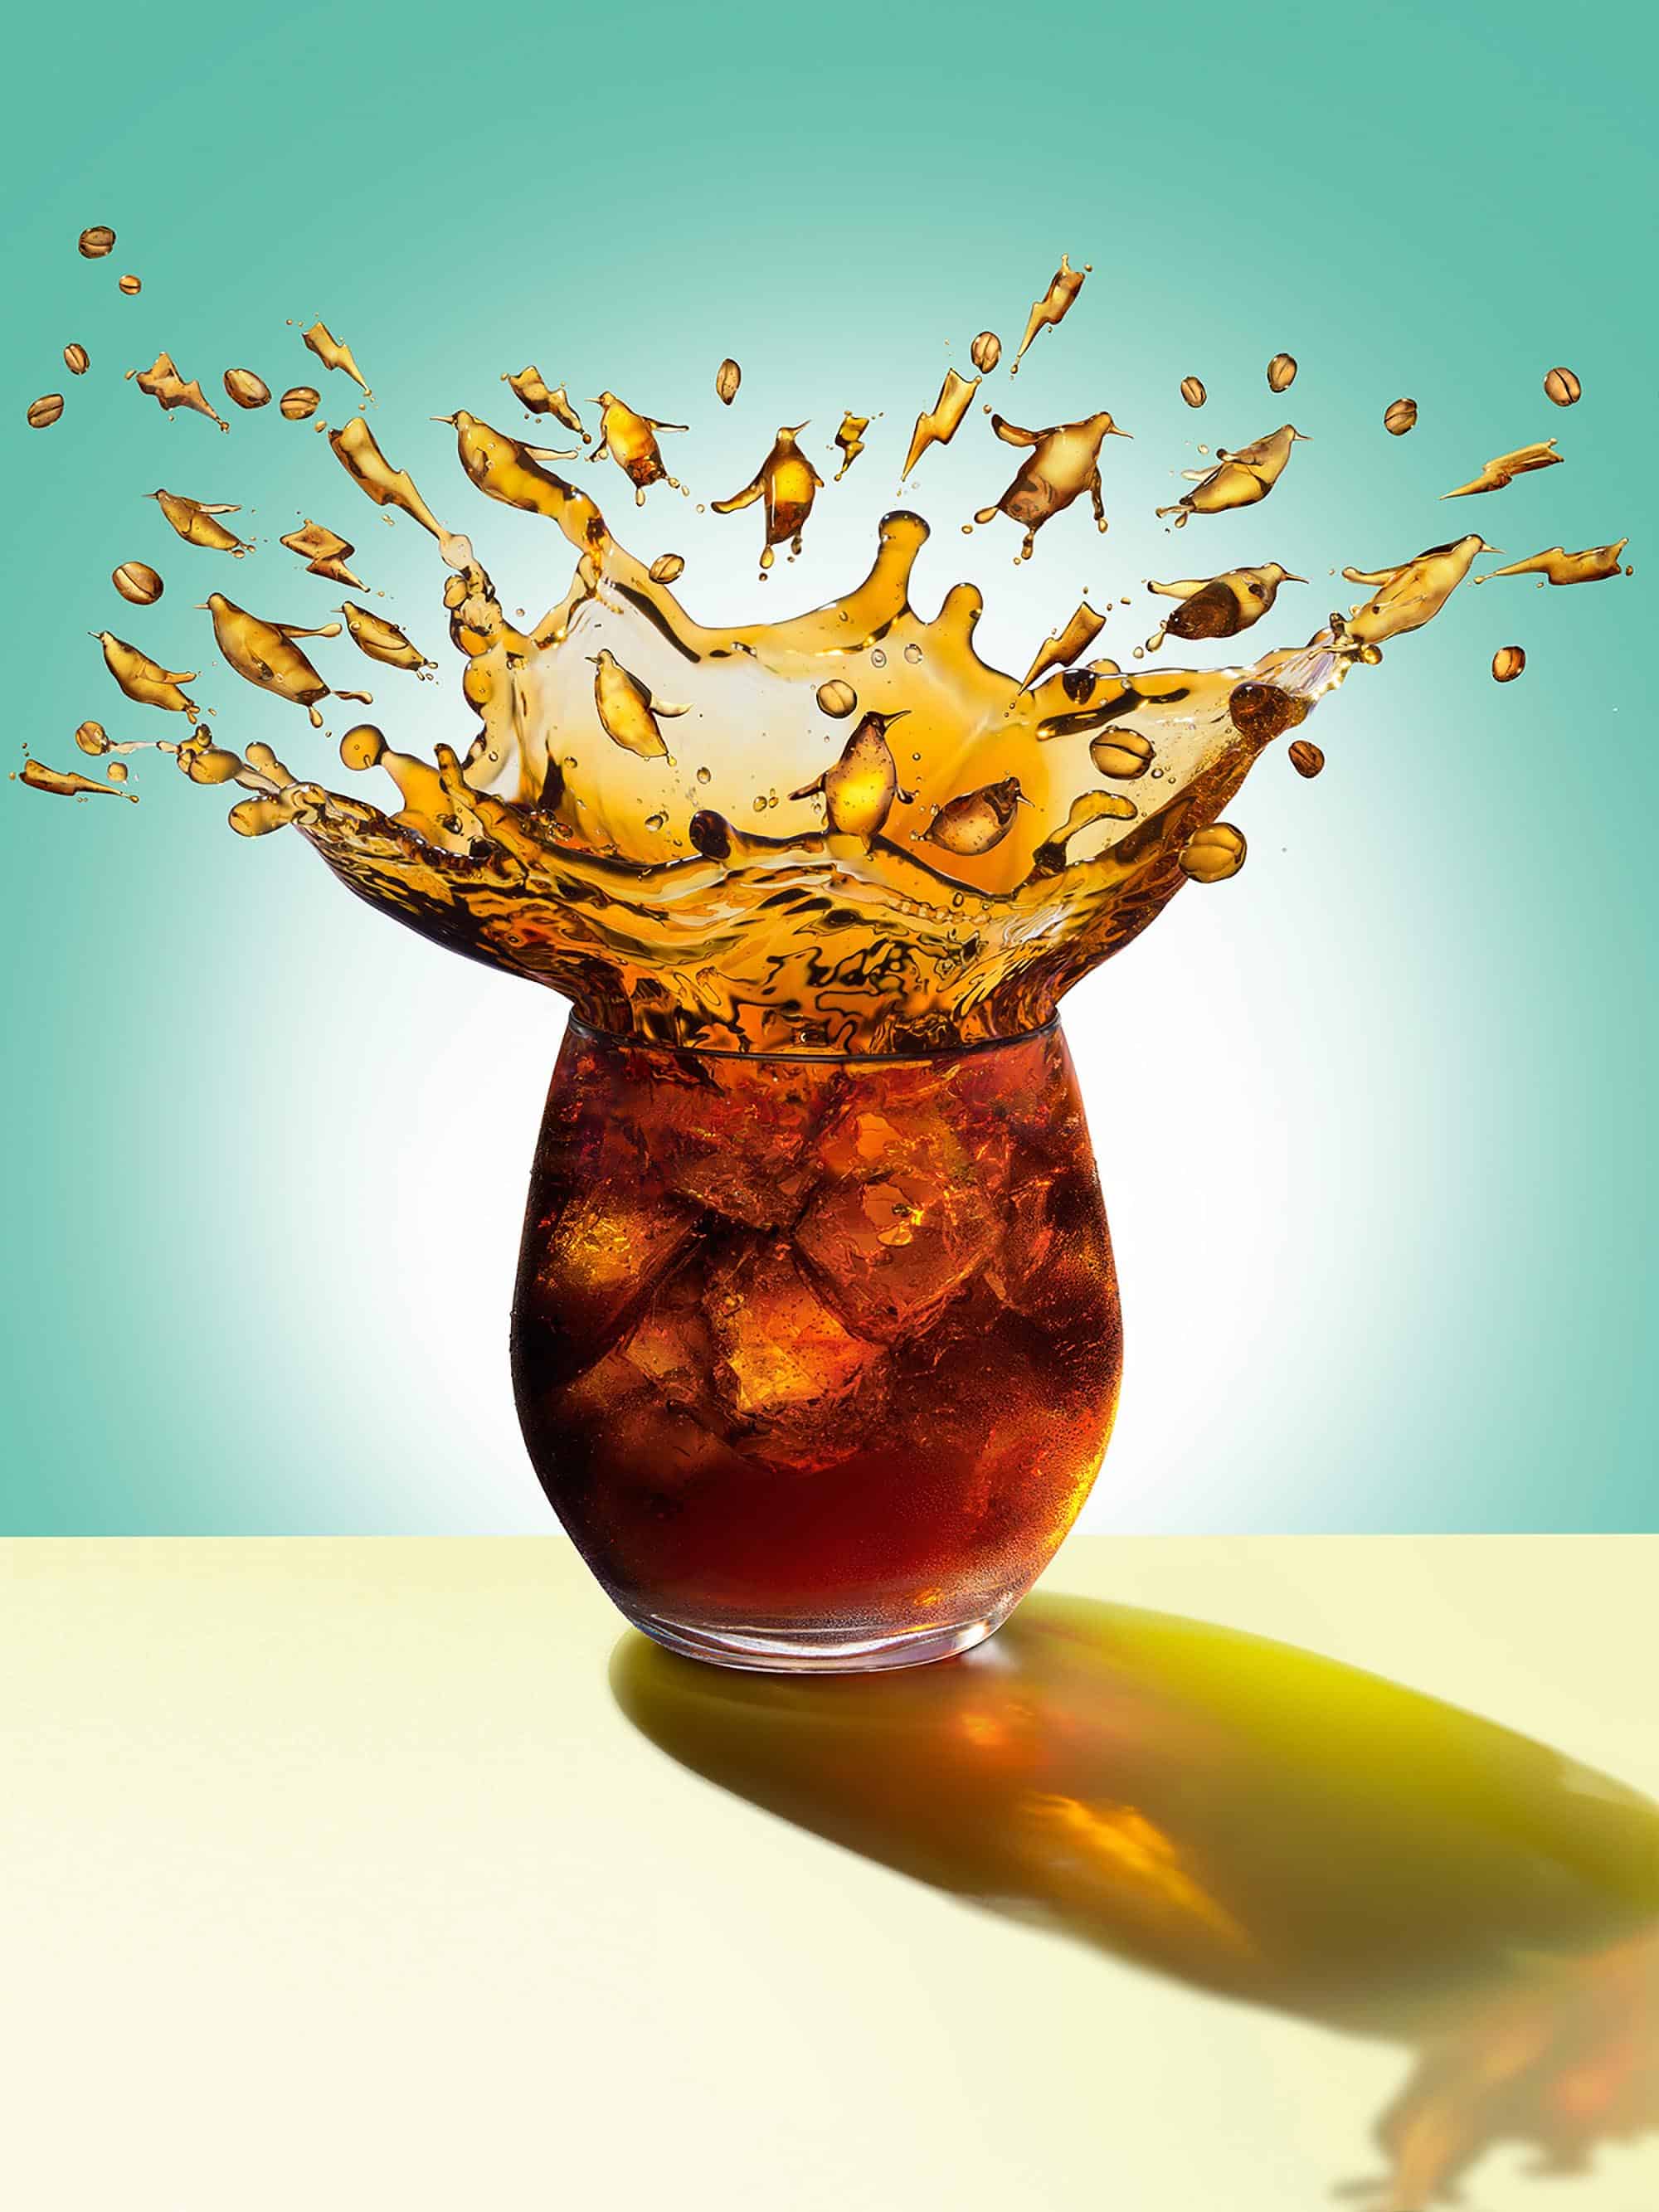 Costa Cold Brew Inspiring Coffee Photography Jonathan Knowles Advertising Drinks